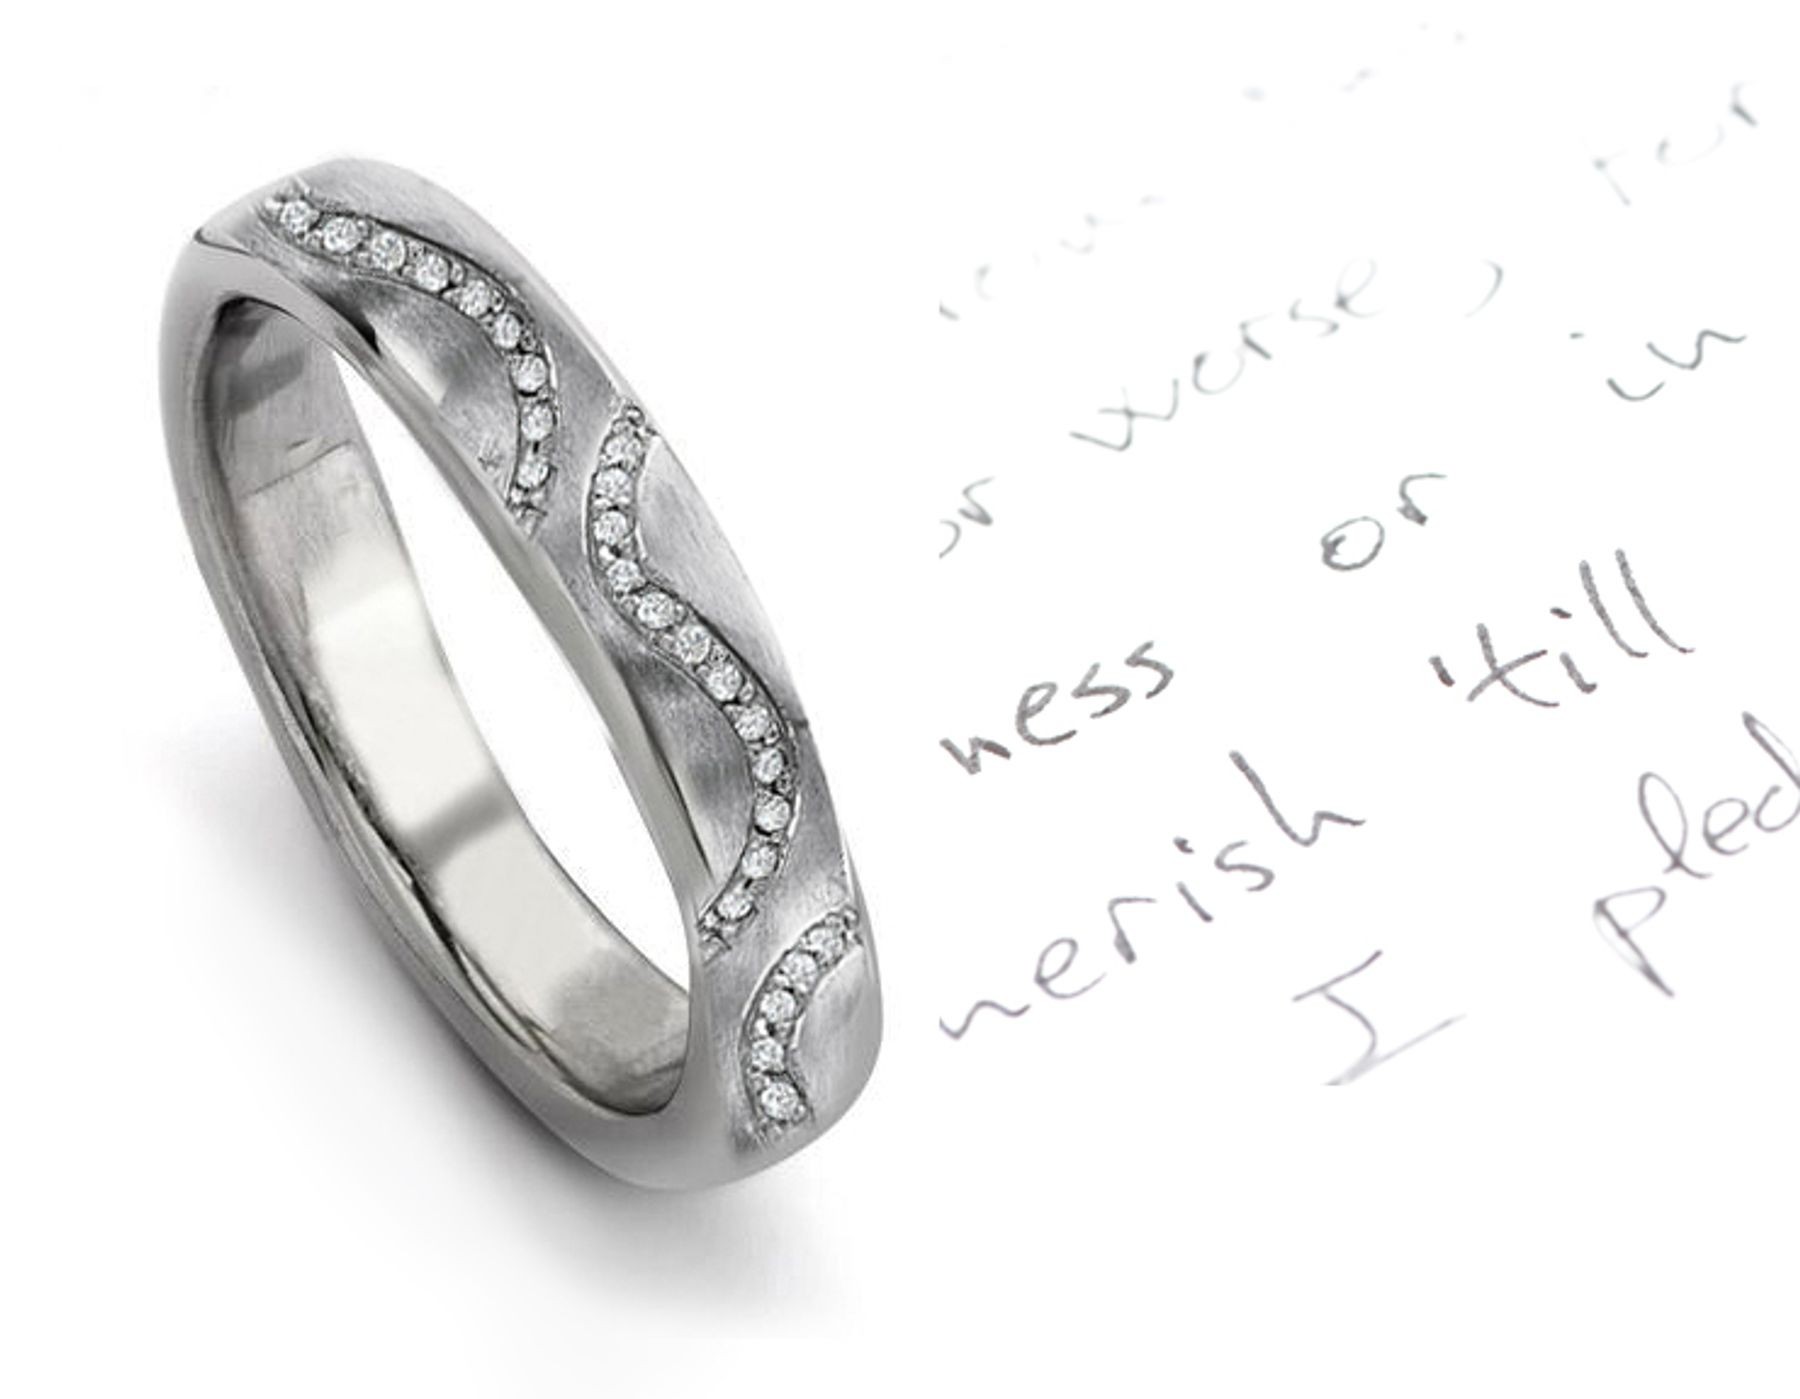 Impeccable: View Sparkling Swirling Flow Pattern Diamond Eternity Band in Shiny Finish Platinum